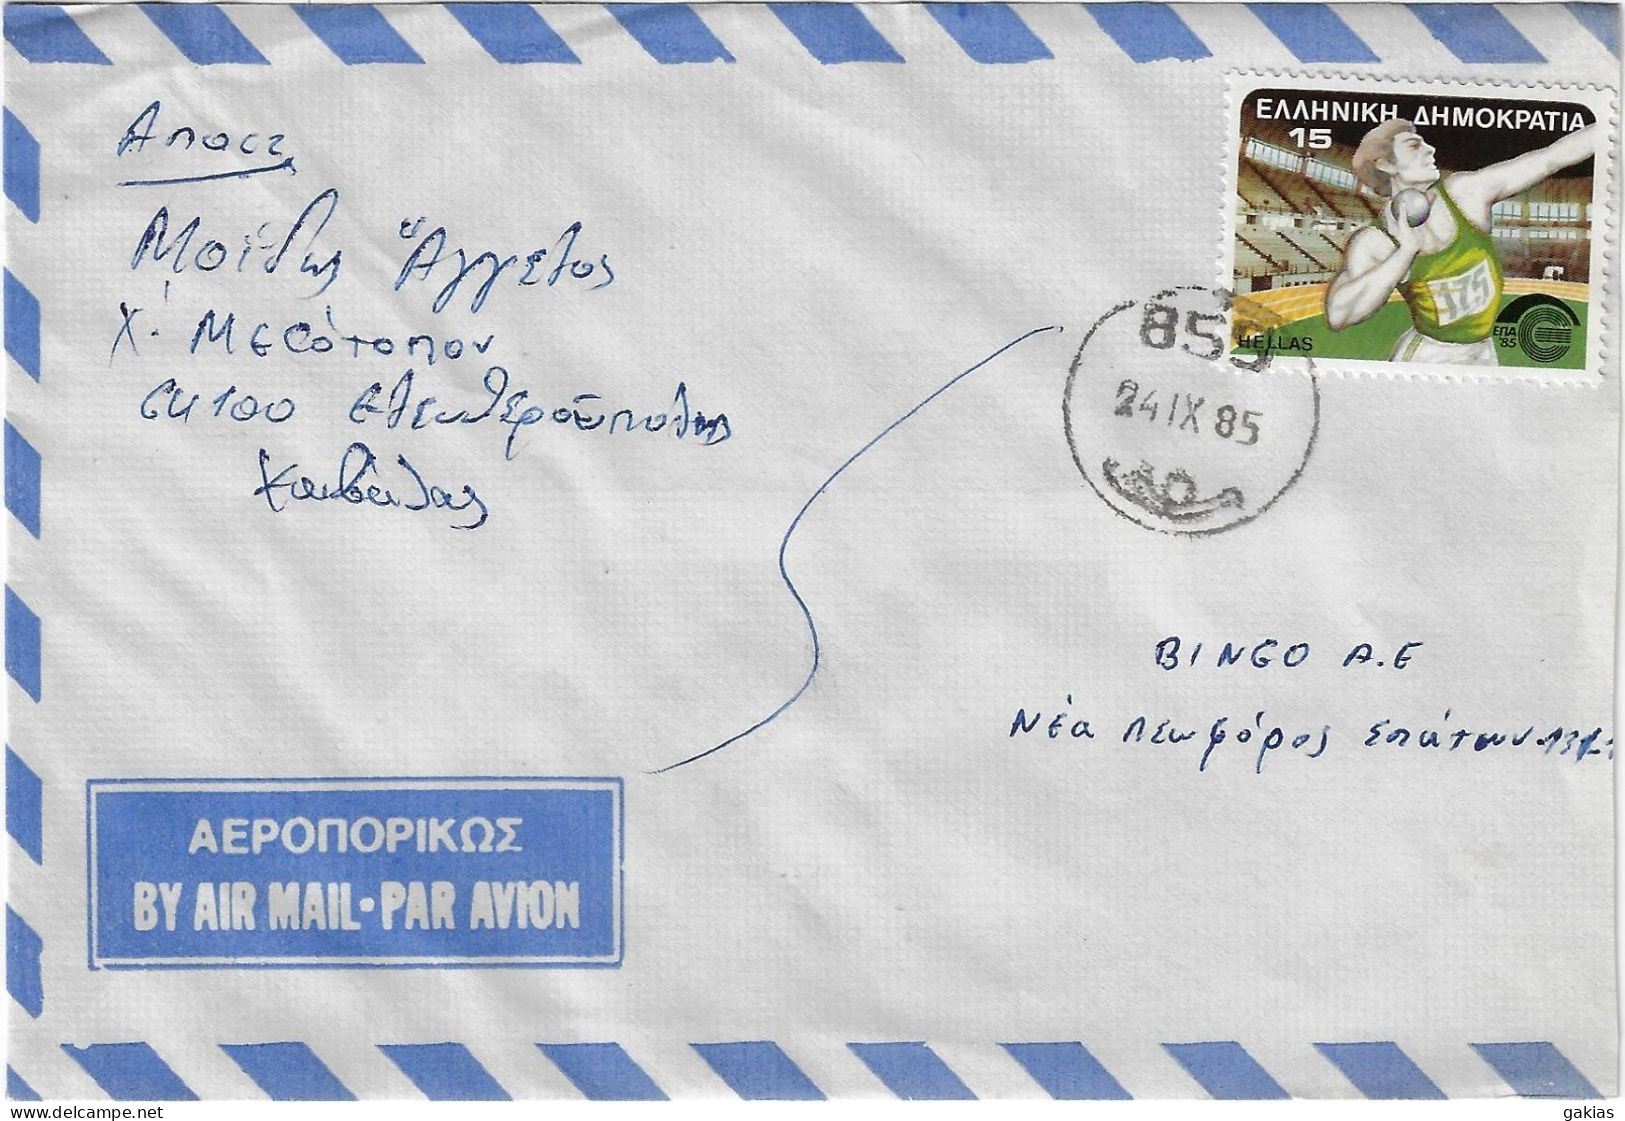 Greece 1985, RURAL POSTHORN 859 On Cover. FINE. - Covers & Documents